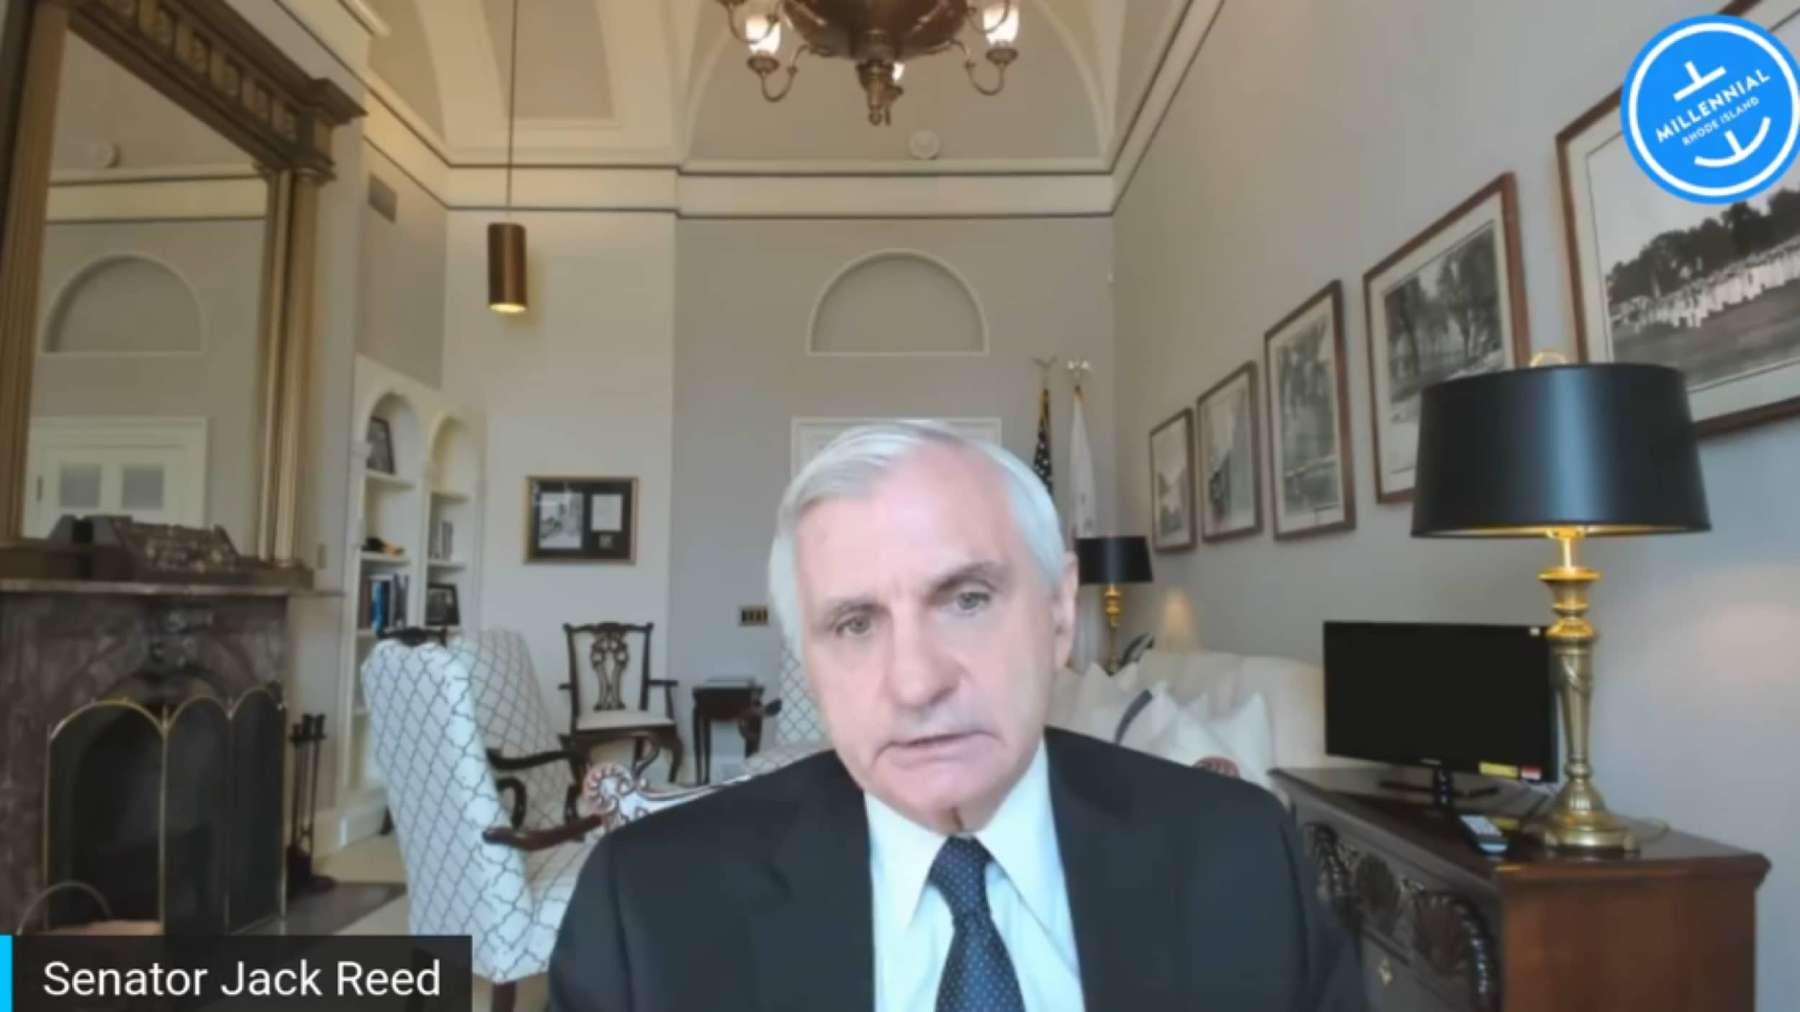 Rhode Island News: Jack Reed takes questions from Millennial RI